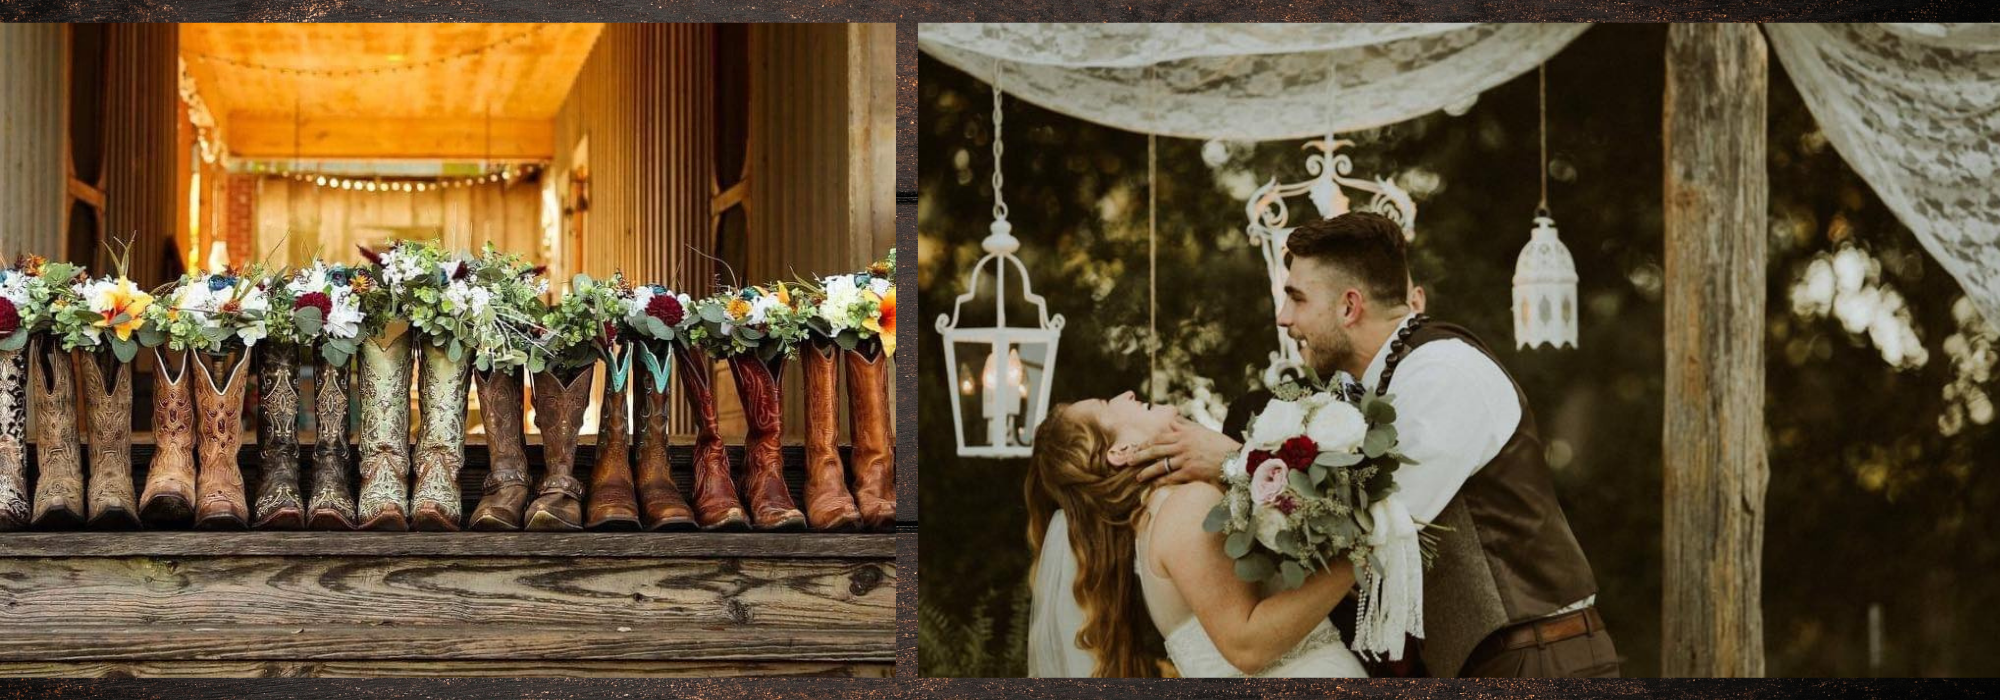 cowgirl boots with flower bouquets and bride and groom embracing 